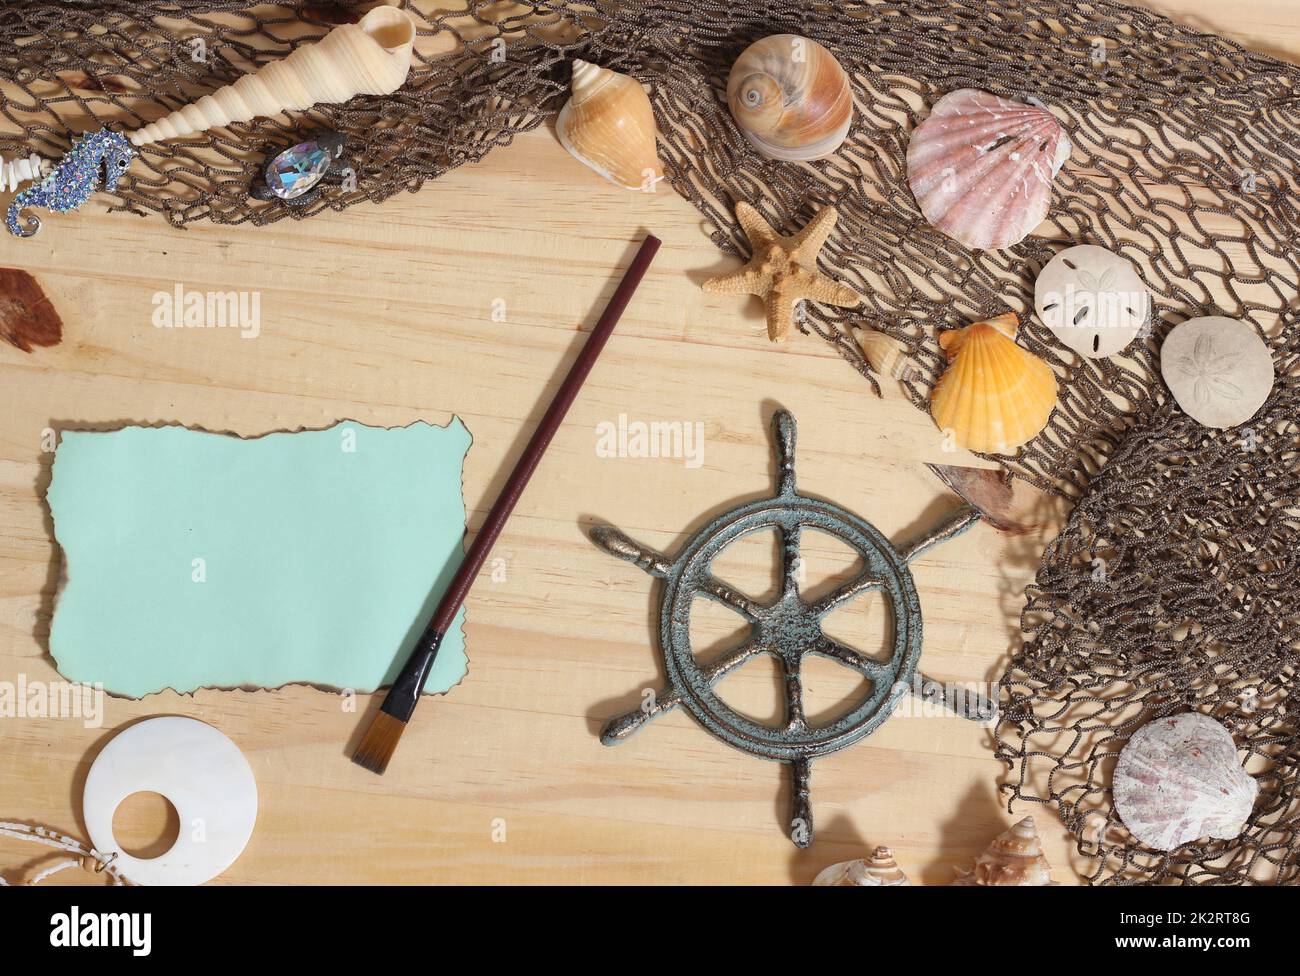 Blank Paper With Burned Edges on Wooden Background With Sea Shells and Fishing Net. Nautical and Coastal Theme Stock Photo